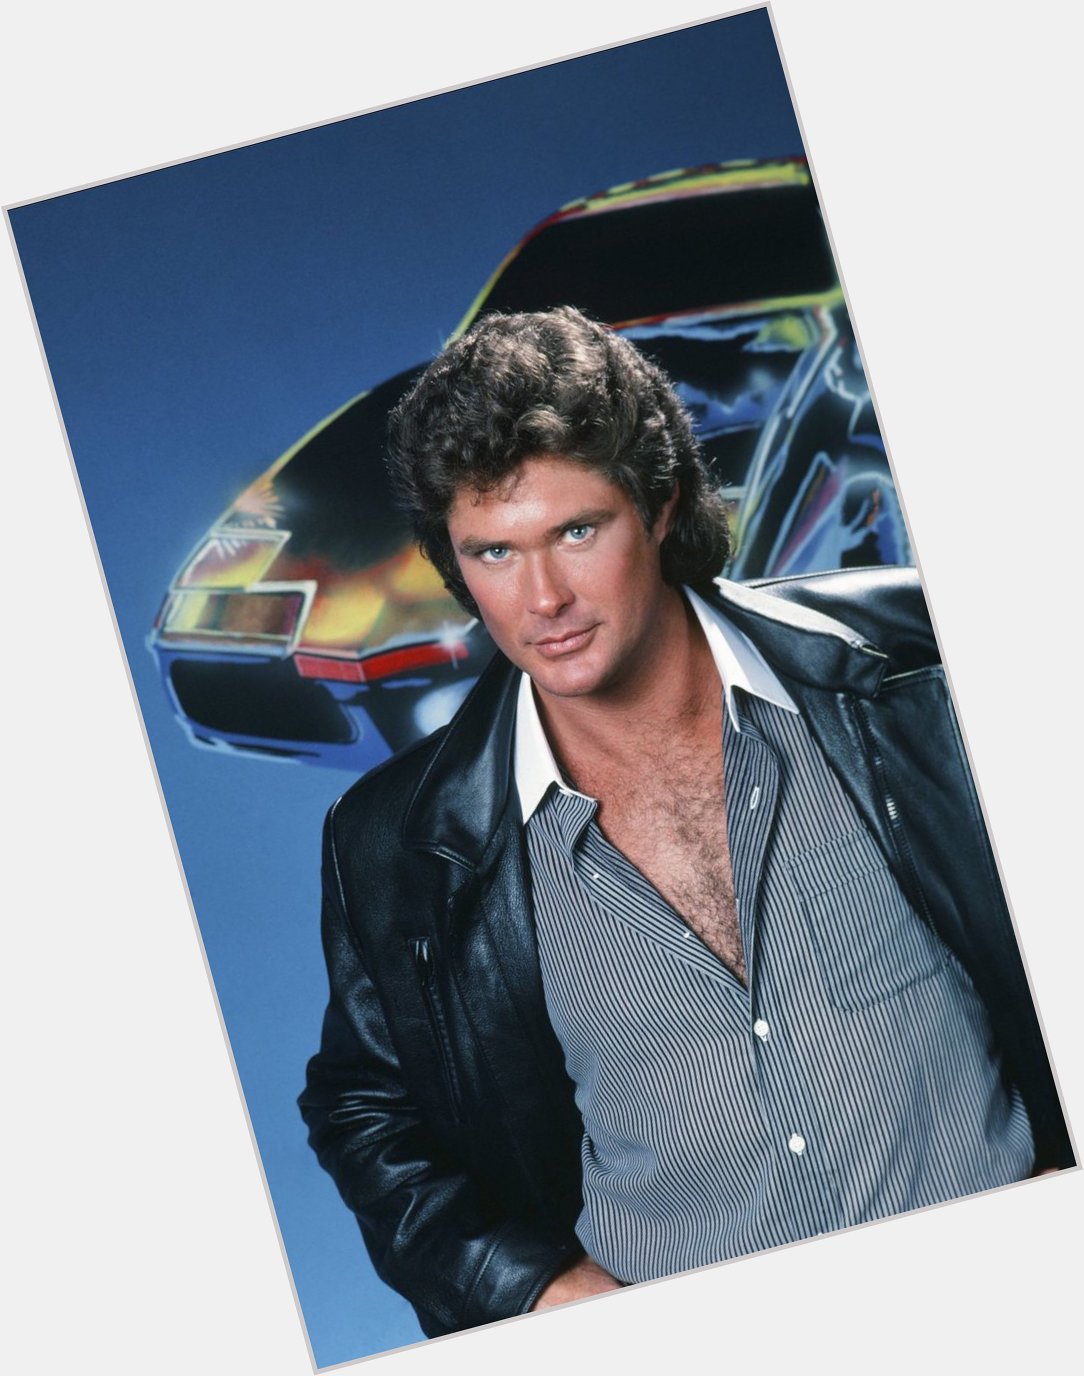 Wishing David Hasselhoff a happy 67th birthday! What is your all-time favorite role? 